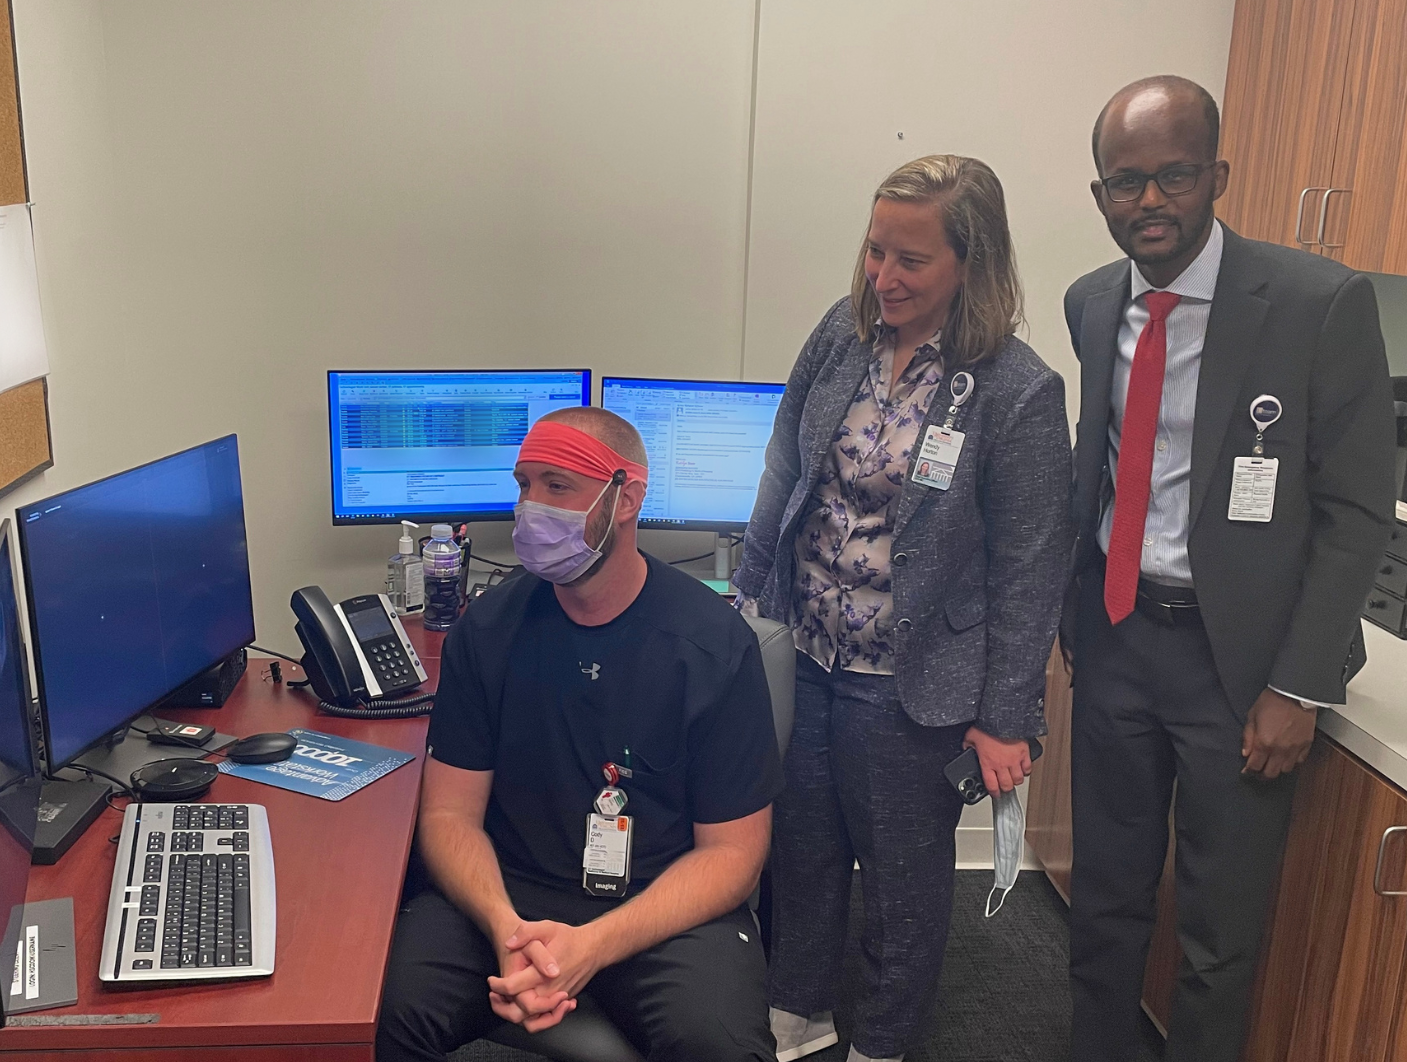 Cody Desper, Lead Computed Tomography (CT) Technologist, shows Wendy Horton and Abdi Somo, Chief Administrative Officer syngo Virtual Cockpit